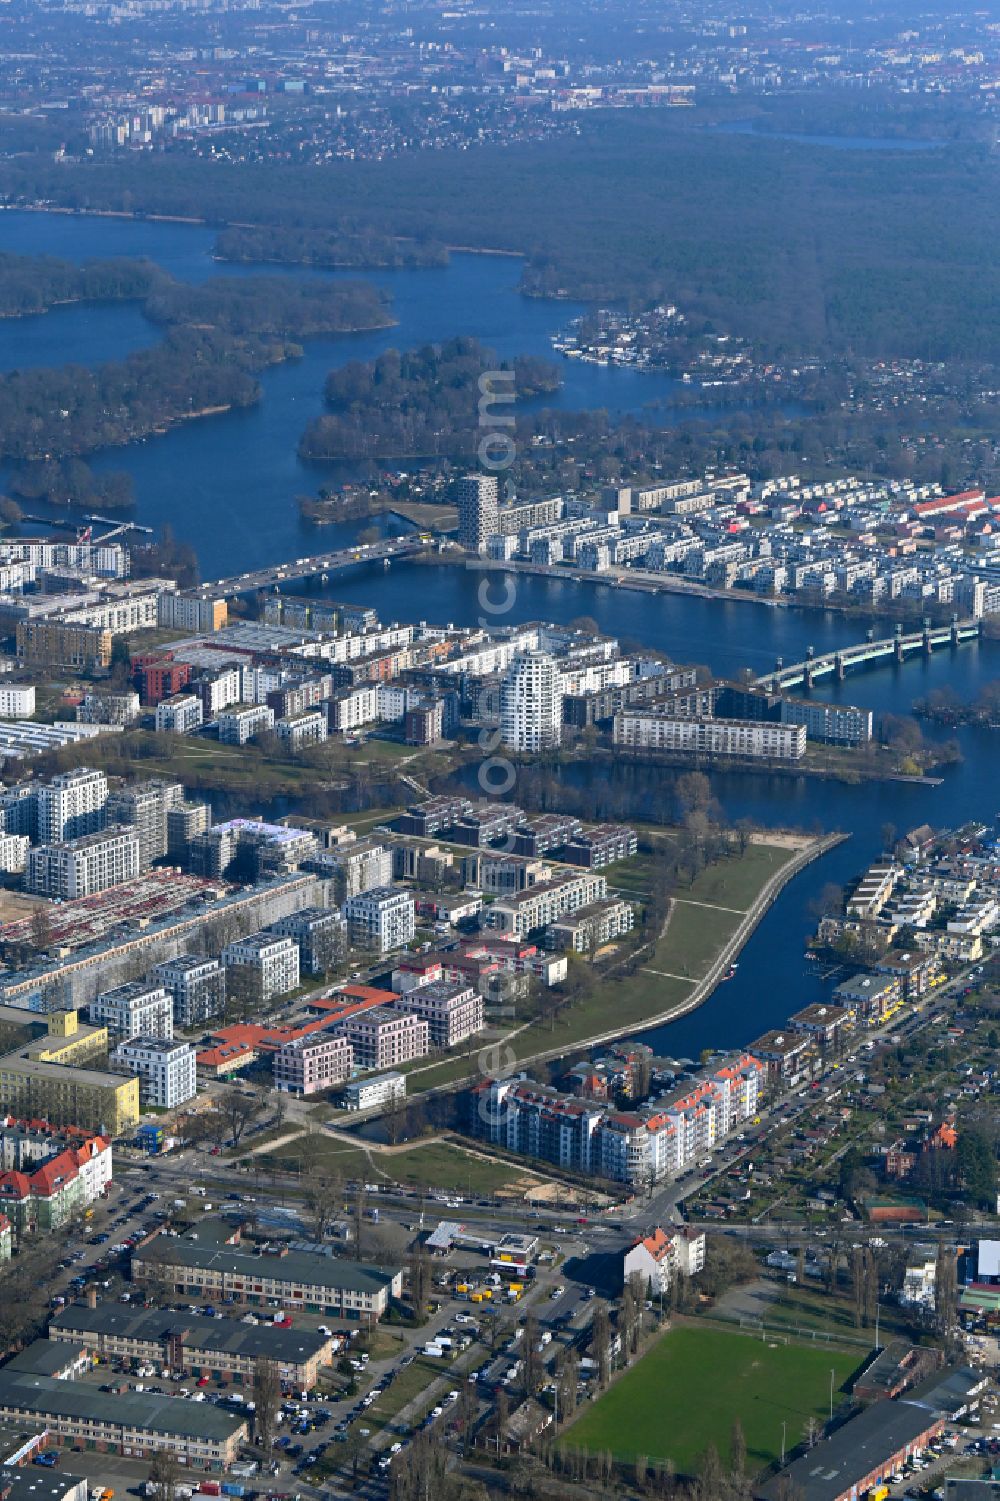 Aerial photograph Berlin - City view on the banks of the Havel river in the Spandau Hakenfelde district in Berlin, Germany